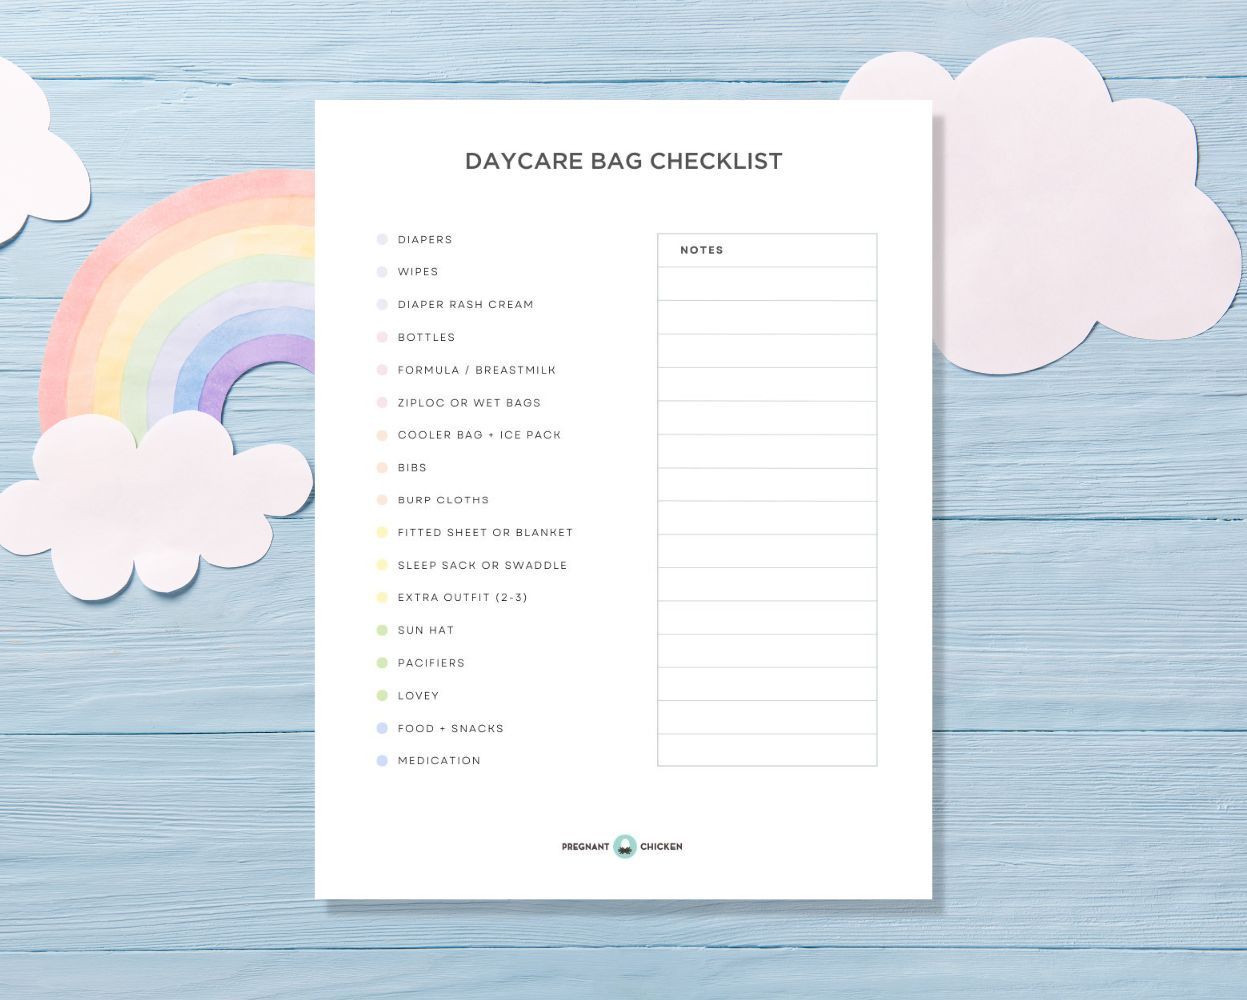 Daycare Supply List For Parents | Items Needed For Daycare | Childcare  Supply List | Daycare Must Haves | Daycare Essentials | 8.5x11 PDF